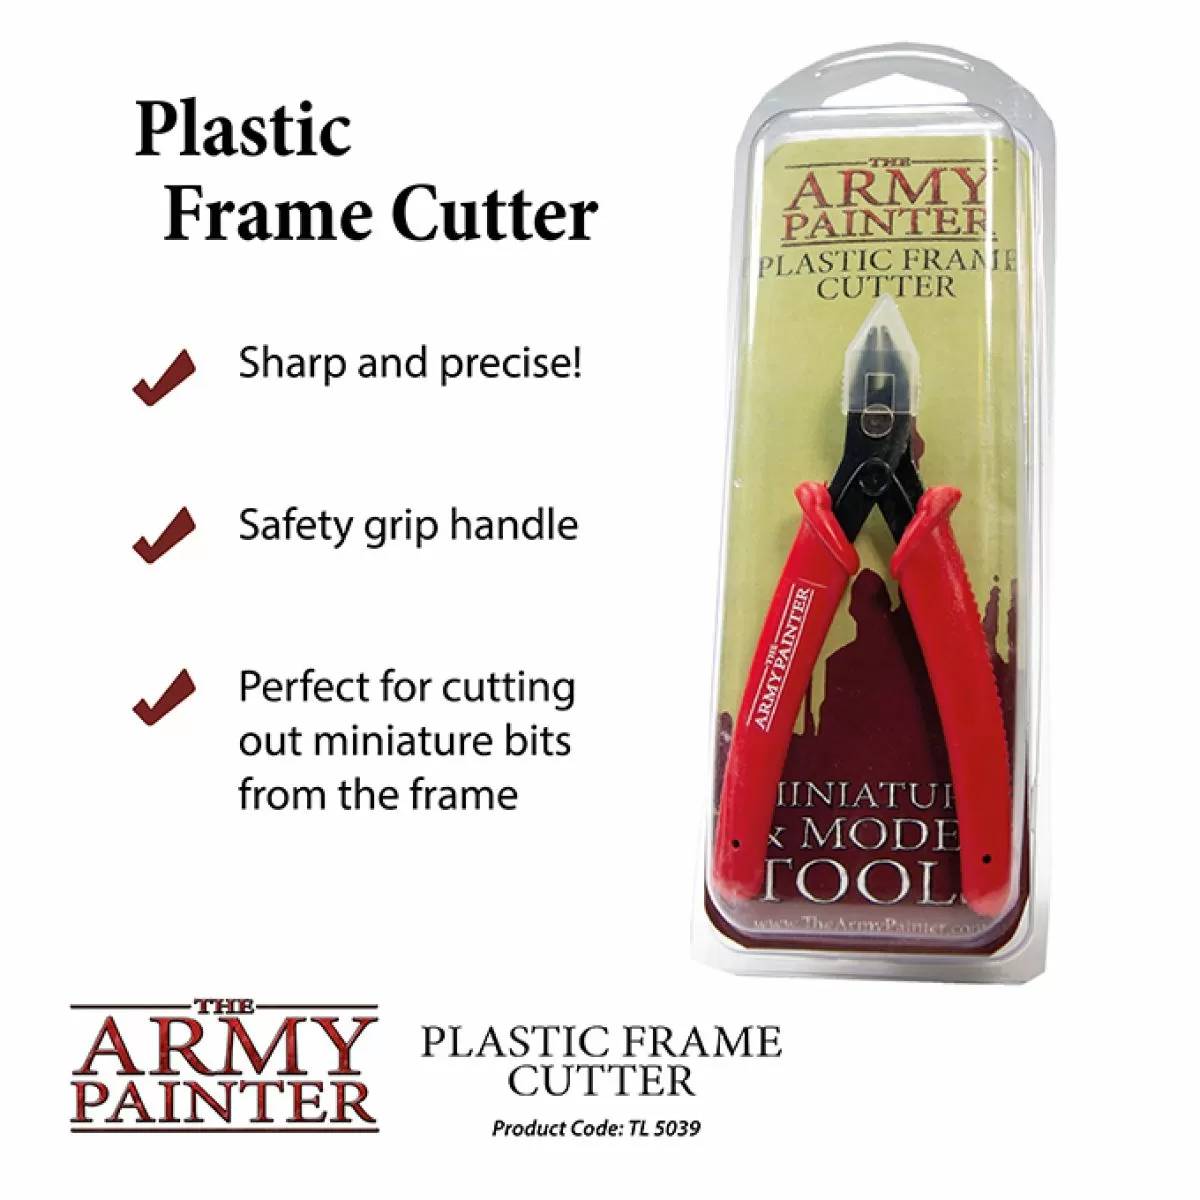 Army Painter Tools - Plastic Frame Cutter